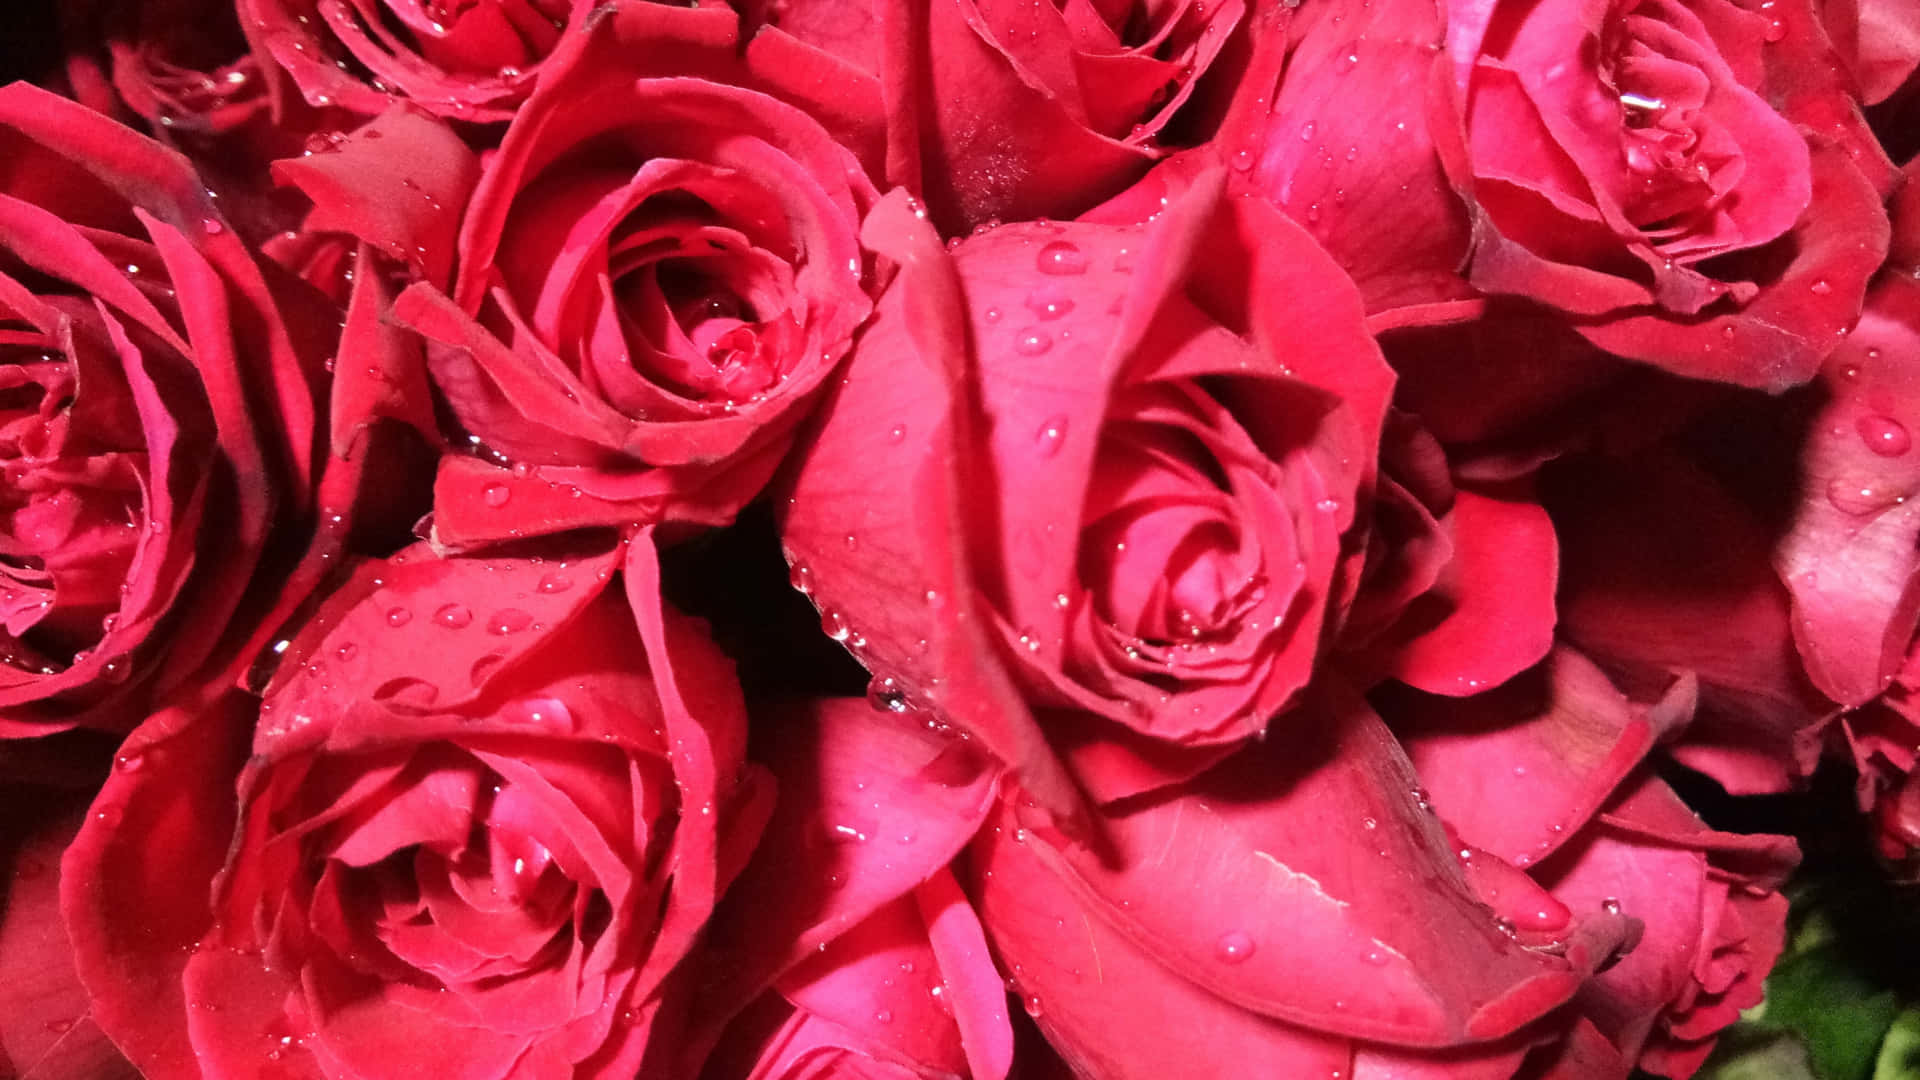 1440p Roses With Droplets Under Sunlight Background